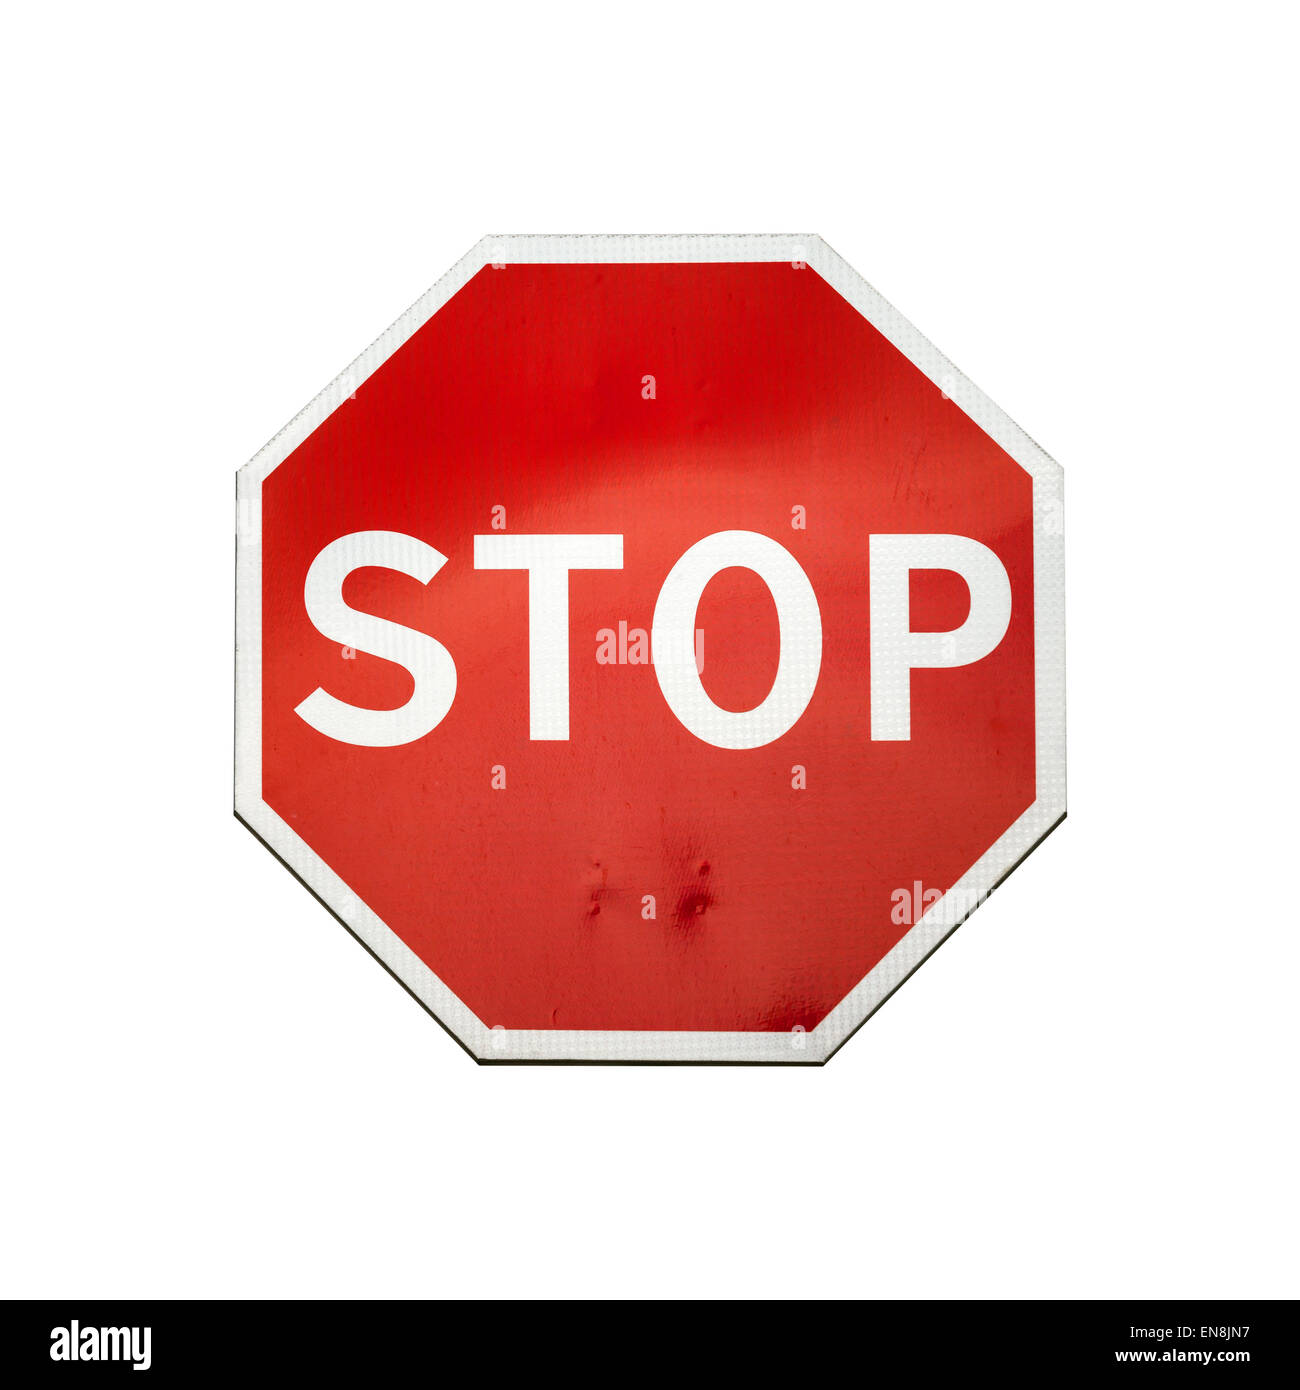 Classical Stop road sign isolated on white background Stock Photo